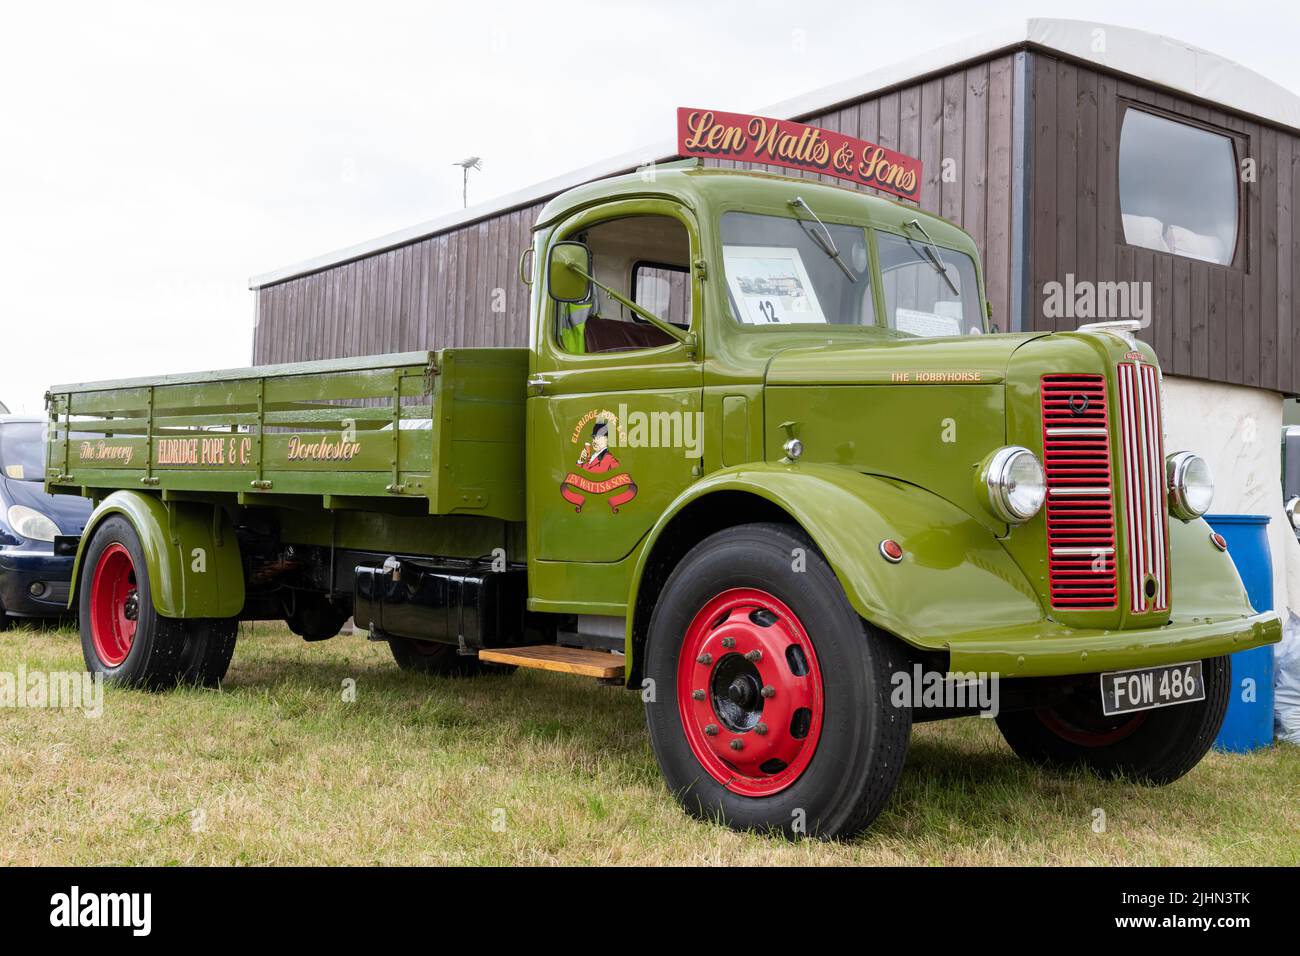 West Bay.Dorset.United Kingdom.June 12th 2022.A restored 1947 Austin K4 truck formerly used by the Eldridge Pope brewery is on display at the West bay Stock Photo